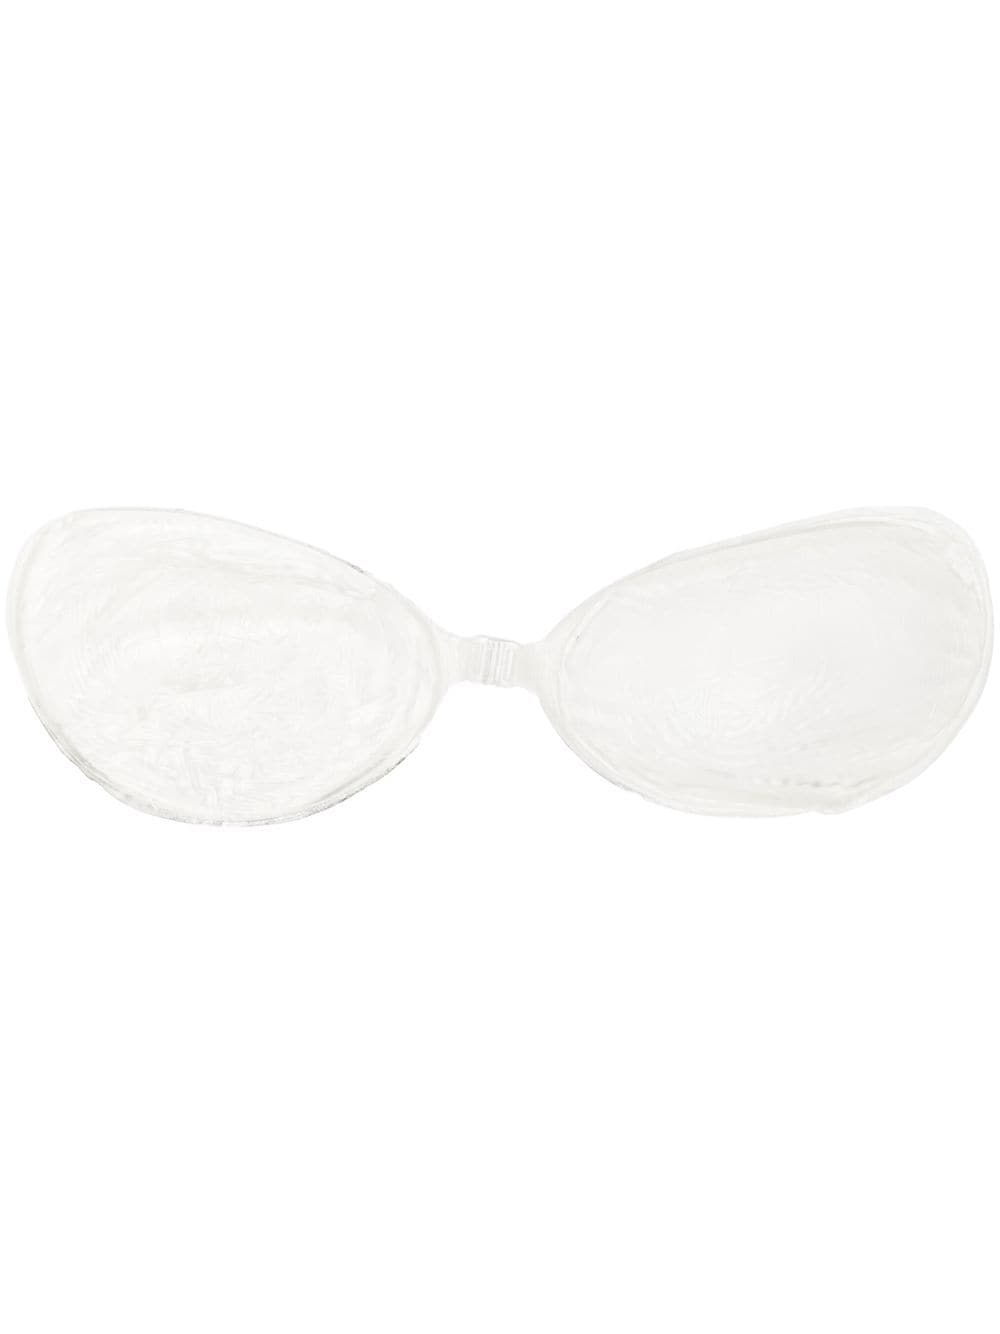 DSIRED B SILICONE BACKLESS BRA